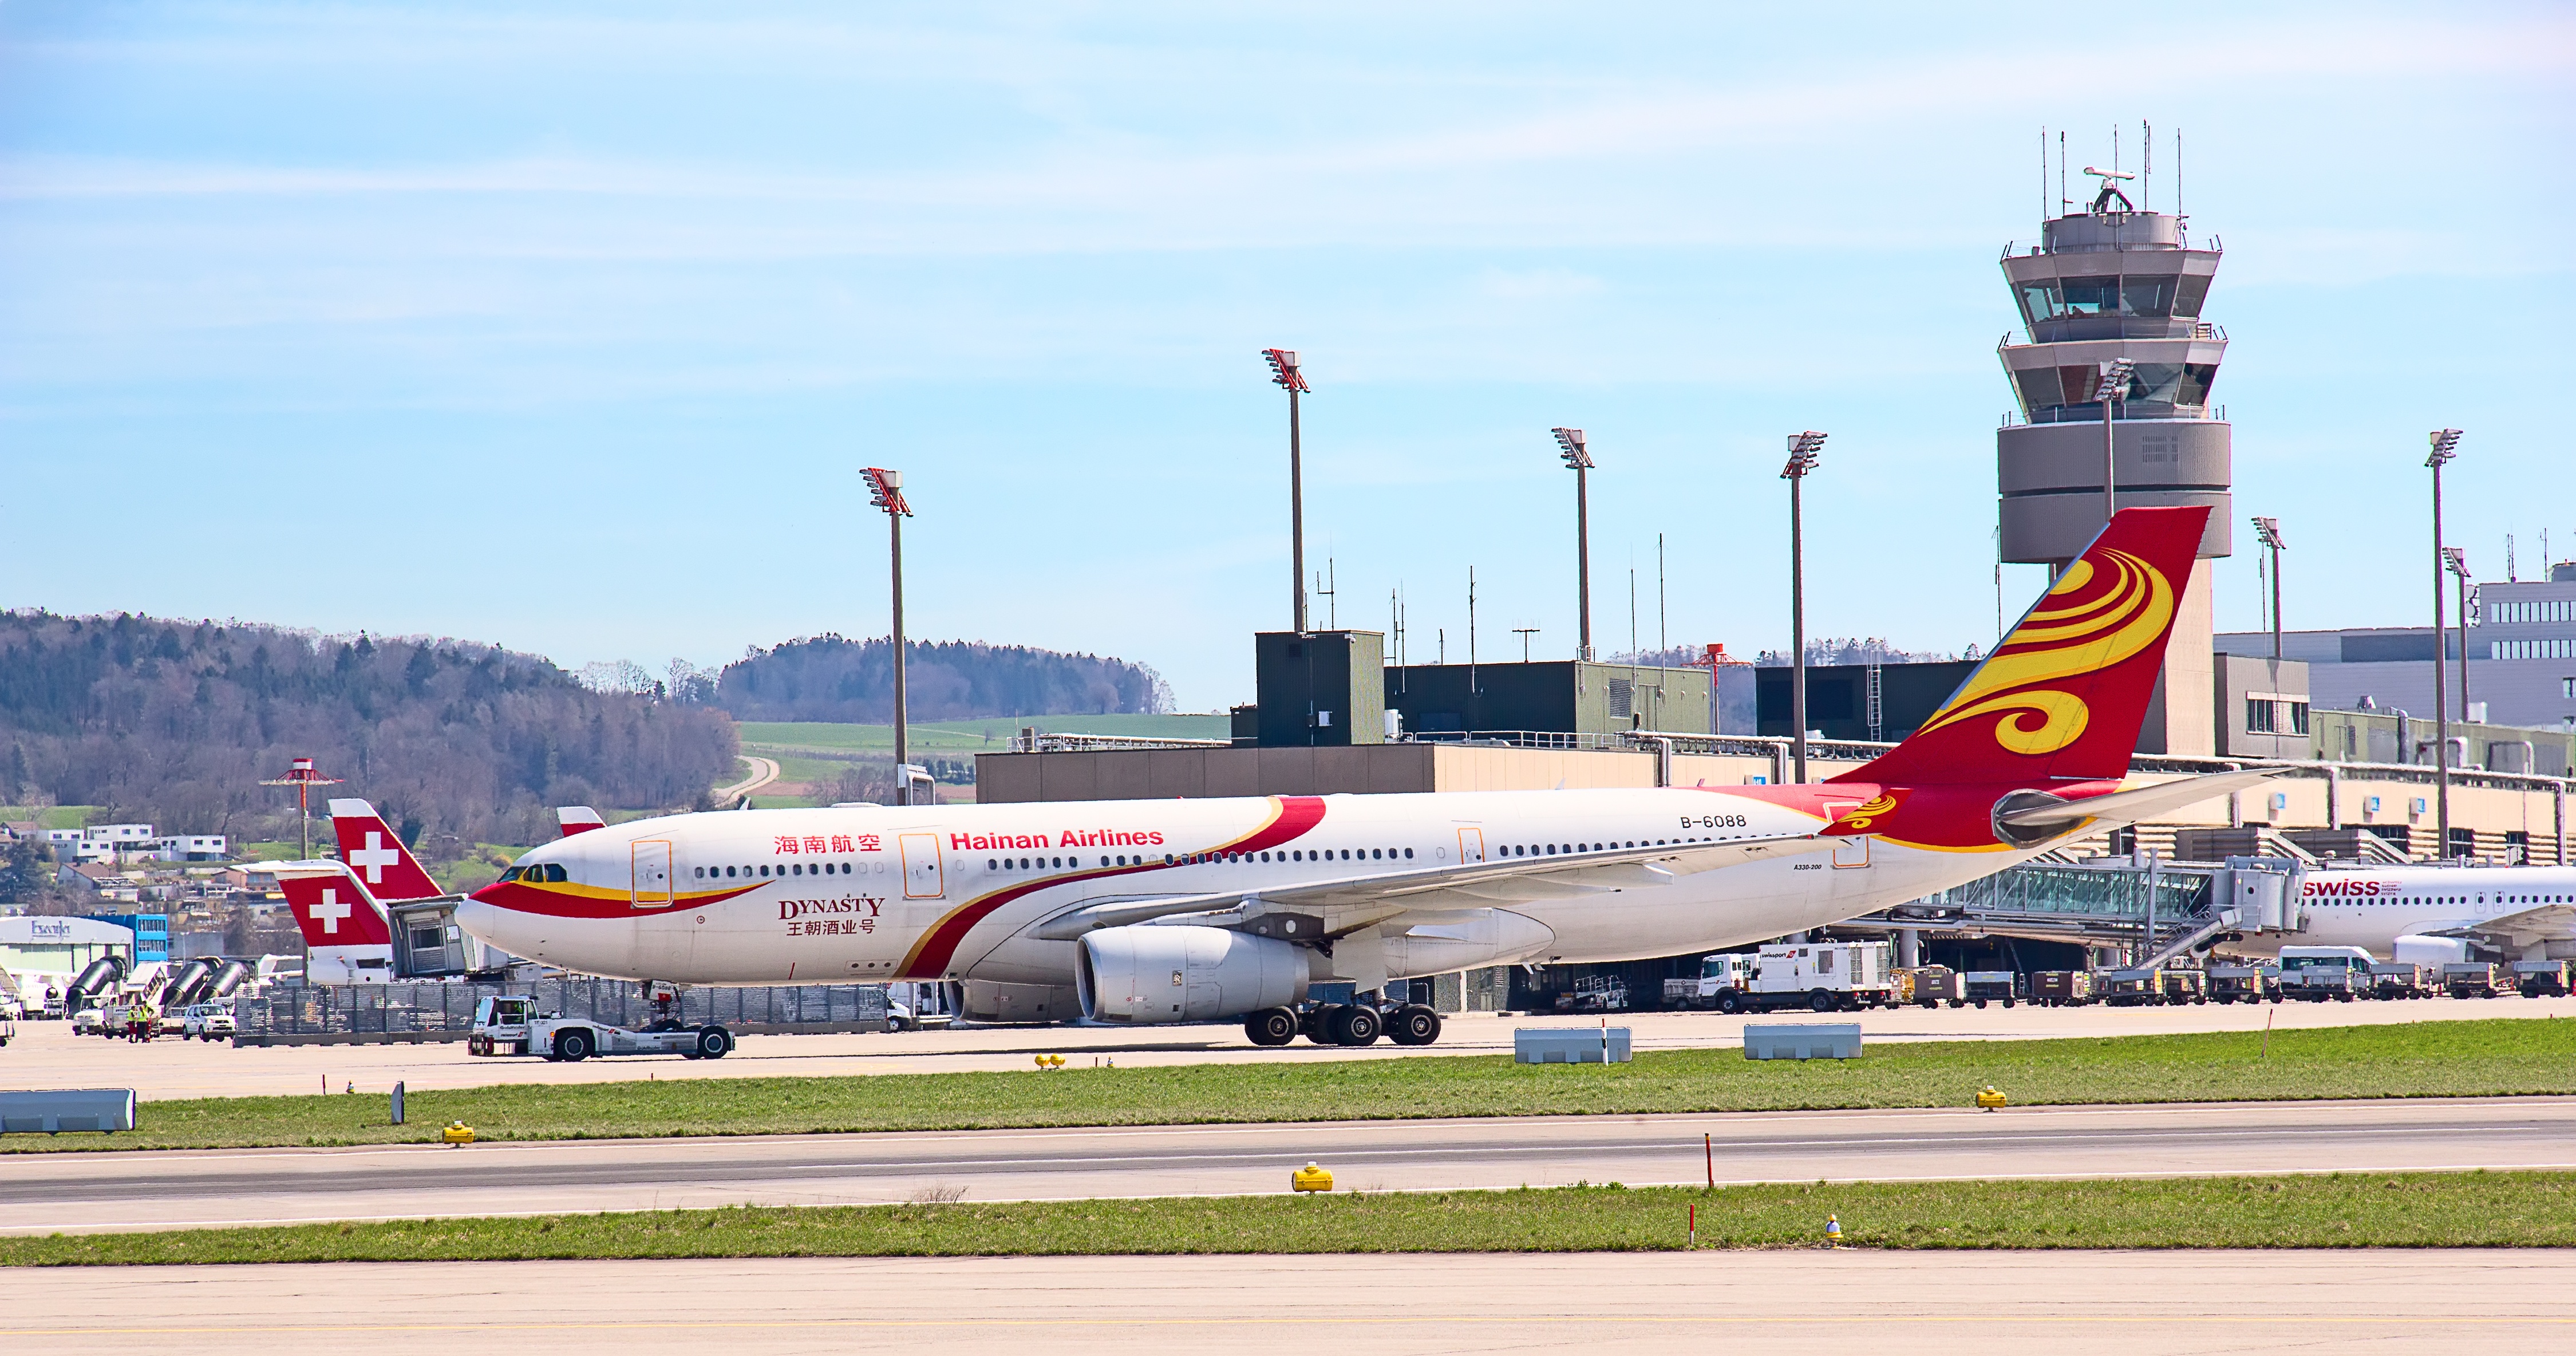 Hainan Airlines is betting on lower-tier cities to fuel the growth of its international operations. (Fedor Selivanov/Shutterstock)